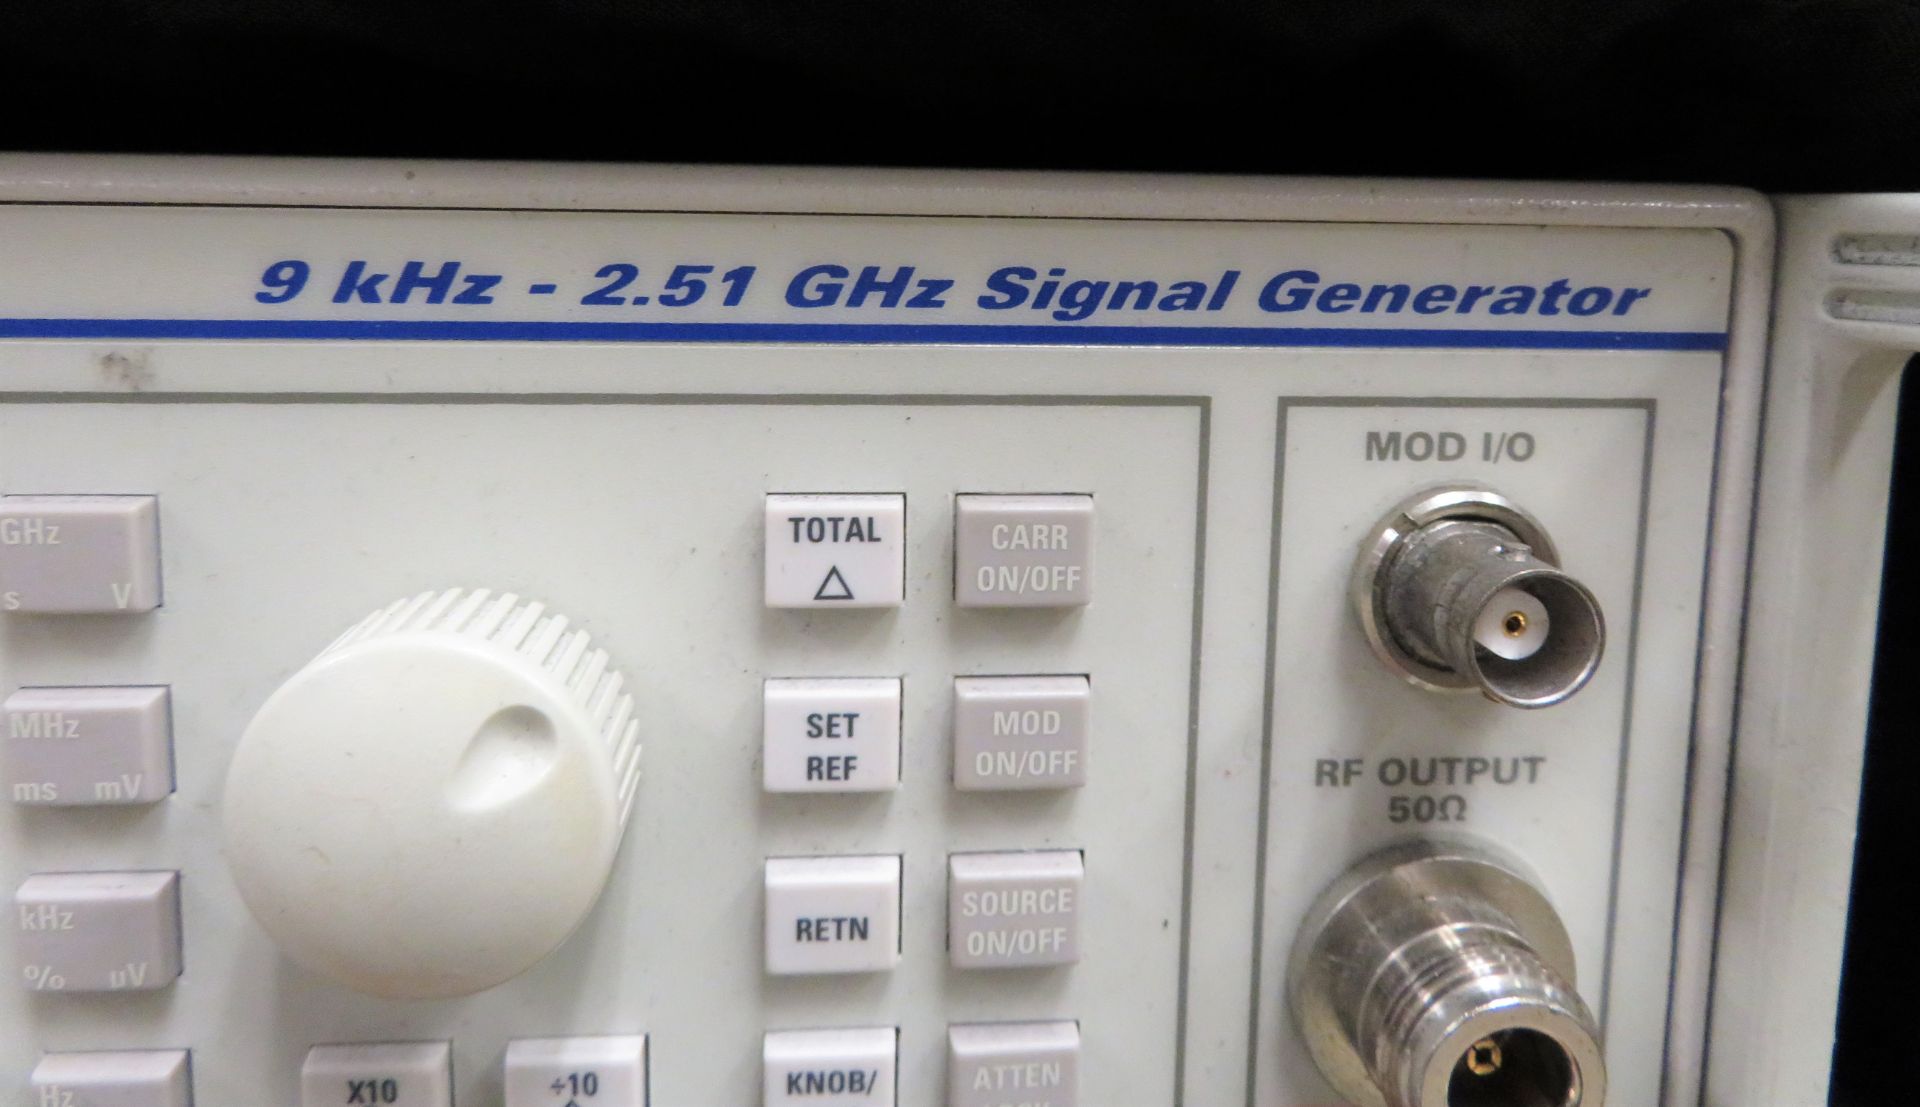 IFR 2025 9kHz - 2.51 GHz Signal Generator. - Image 2 of 5